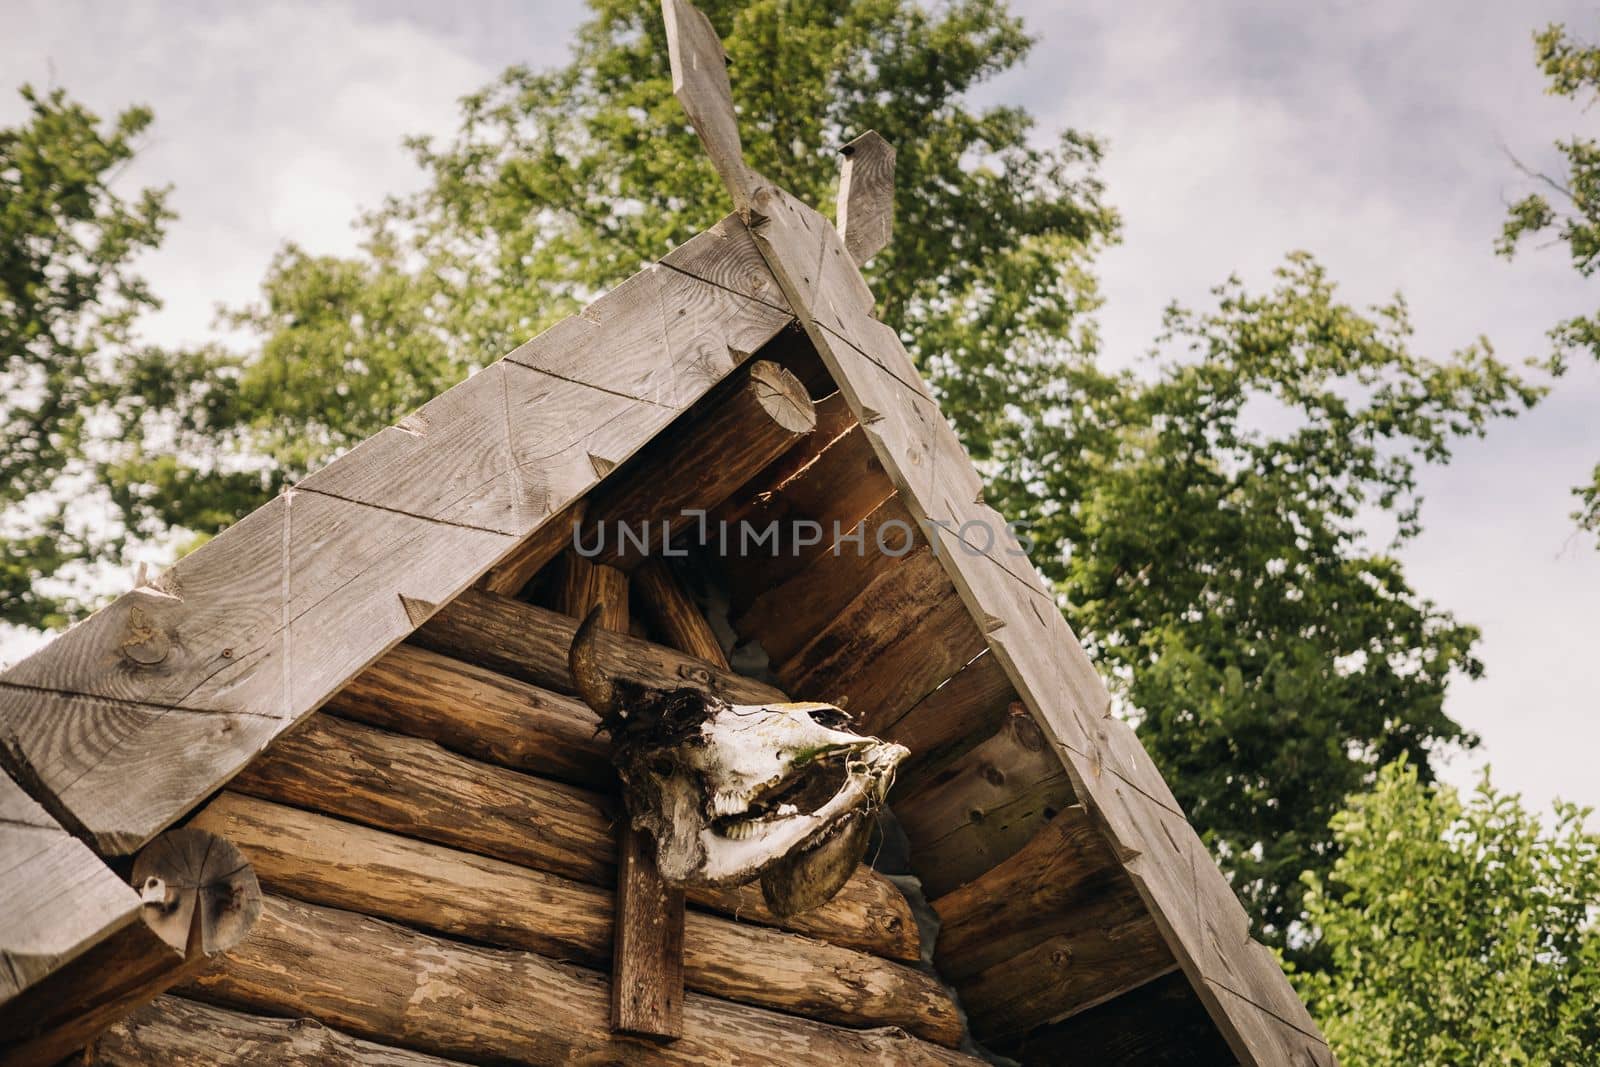 A close-up of a partially destroyed cattle skull that hangs over the entrance to an old triangular house.